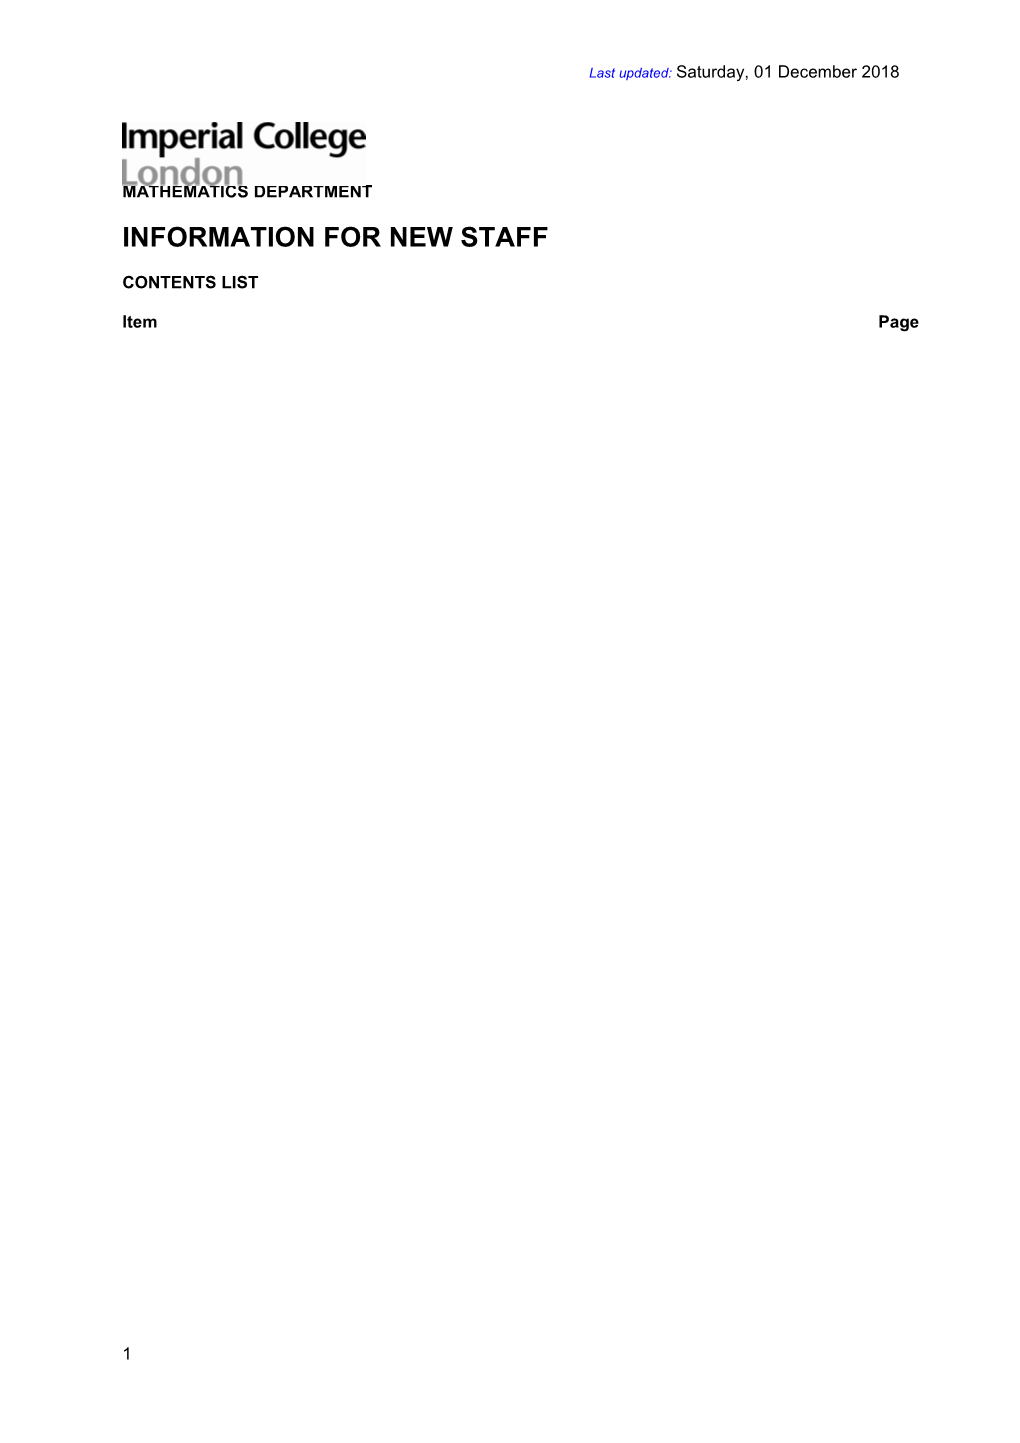 Information for New Staff